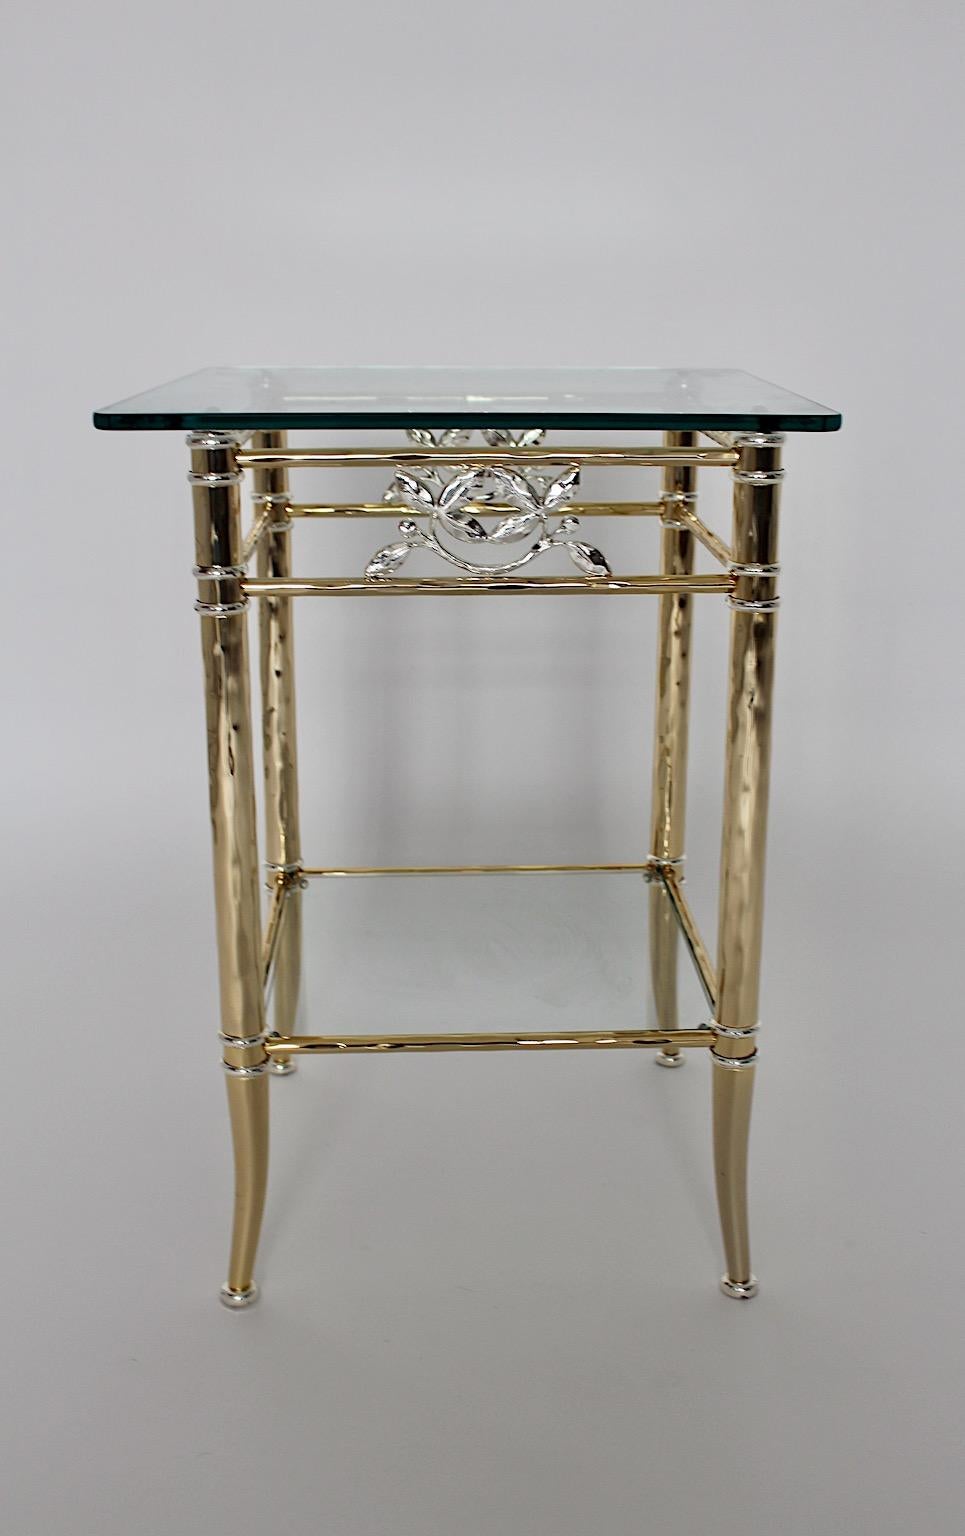 Hollywood Regency Style Freestanding Gold Silver Metal Side Table 1970s Italy For Sale 5